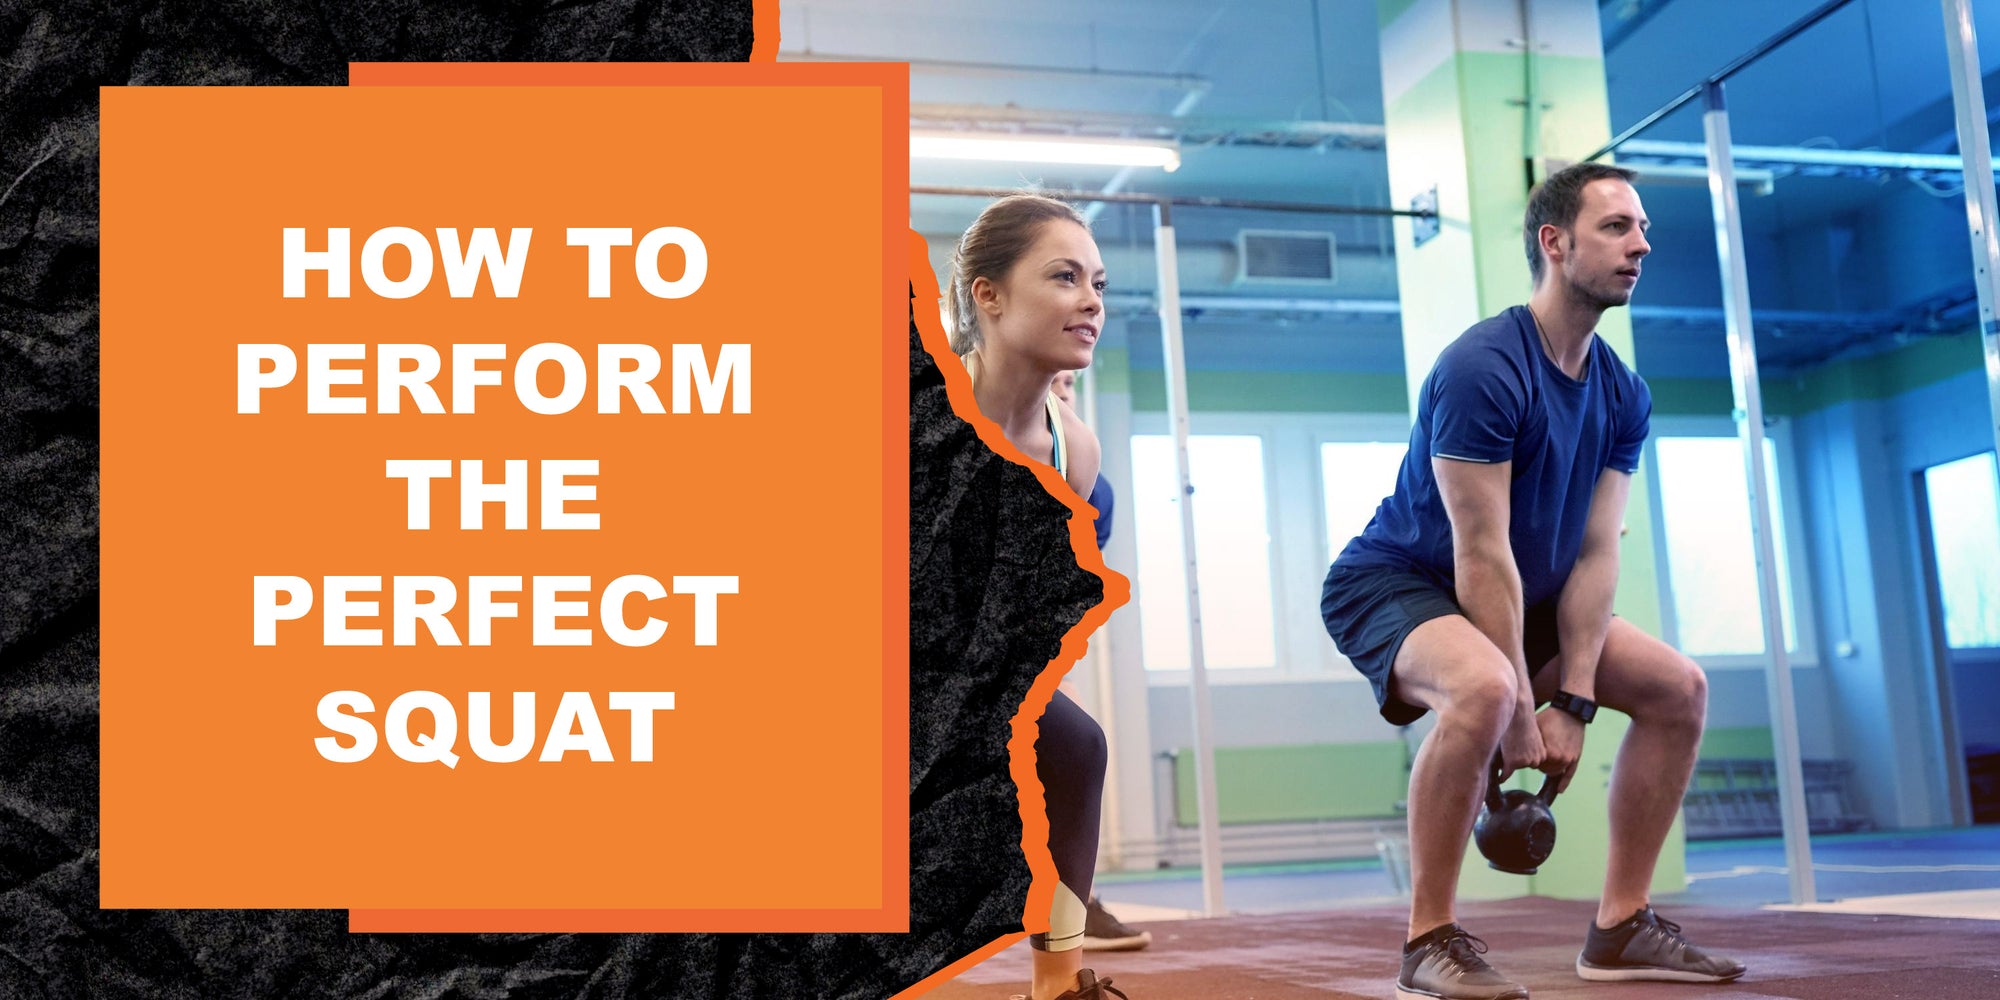 How to Perform the Perfect Squat